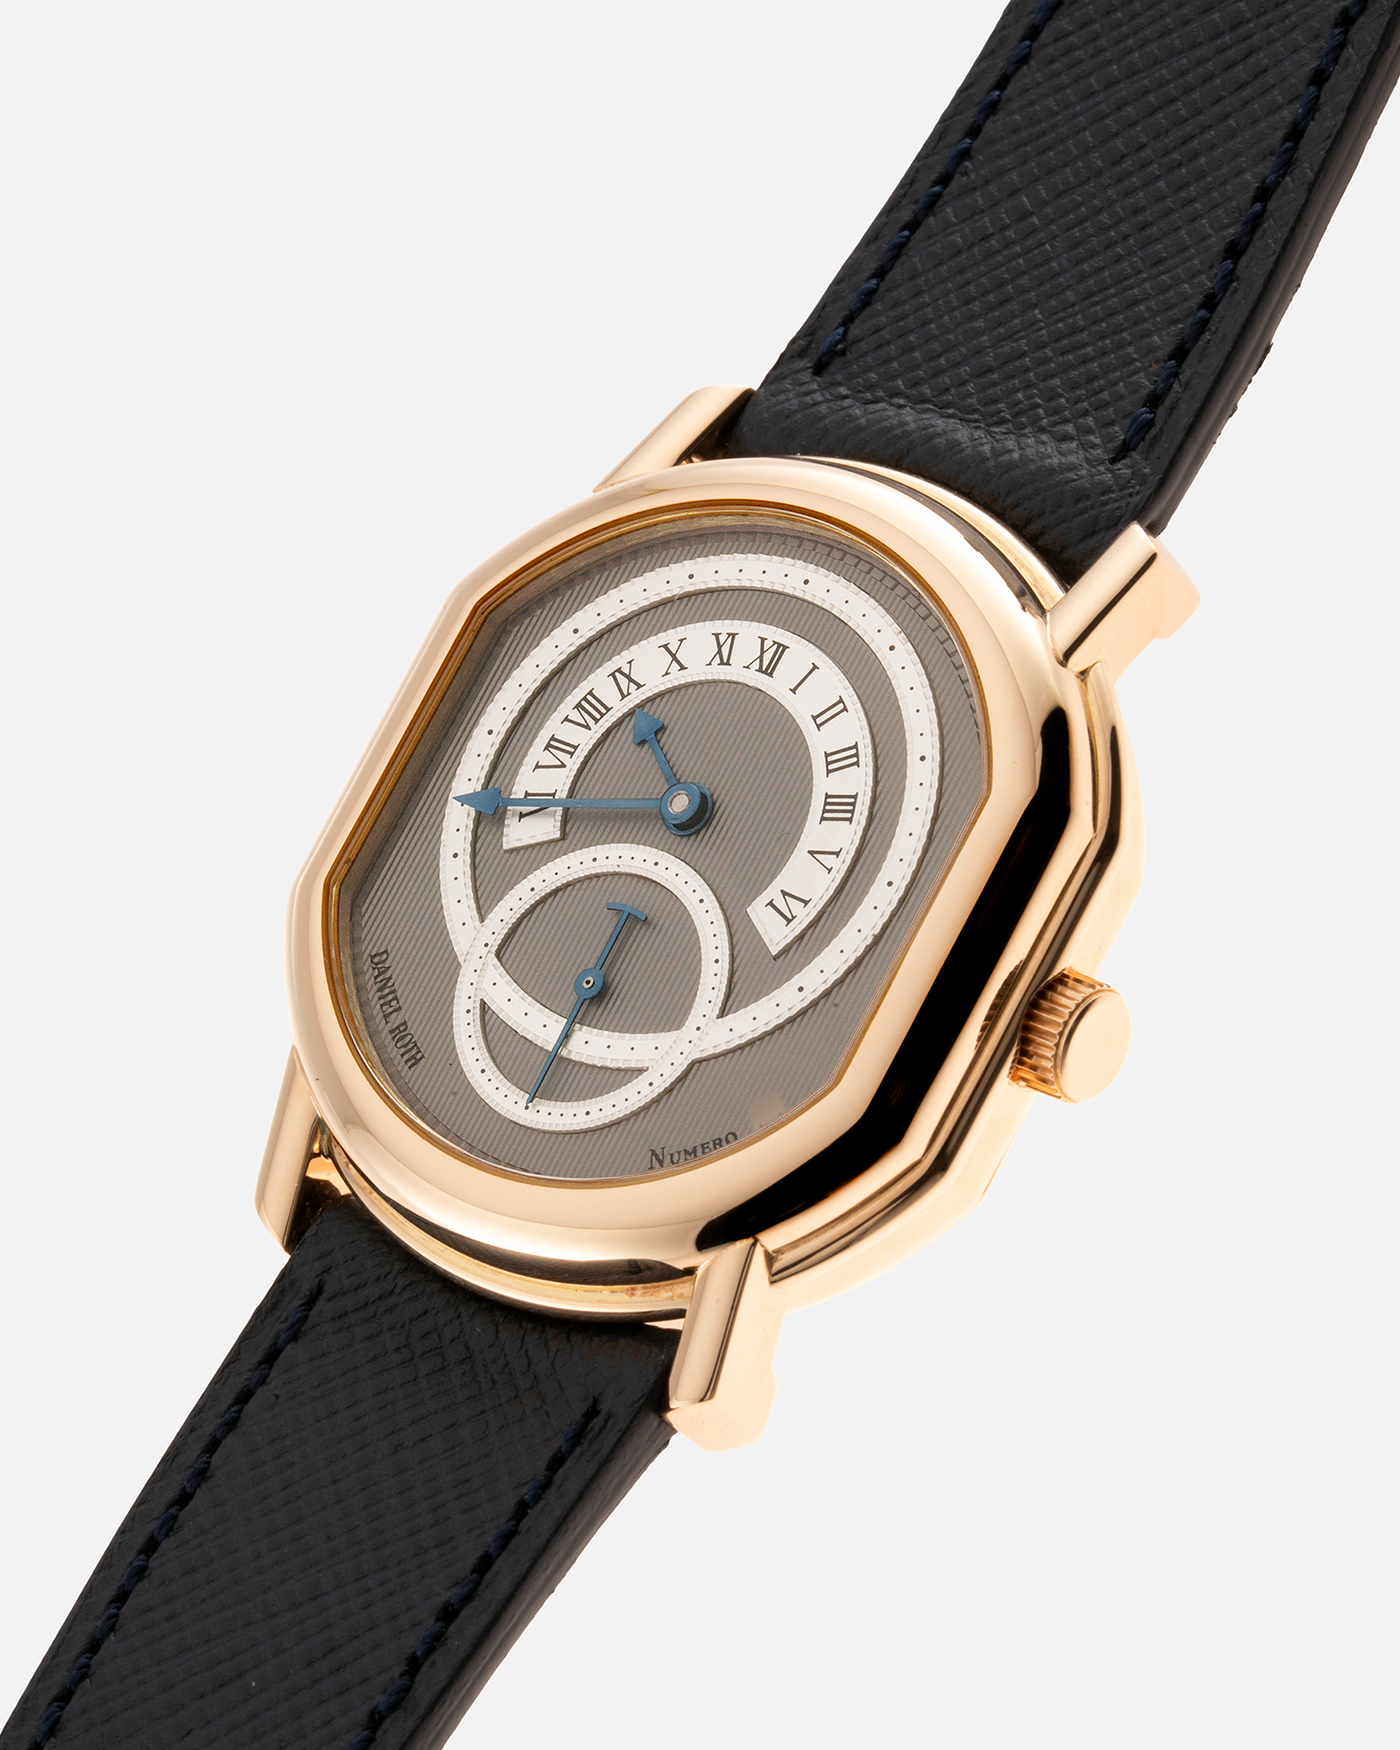 Brand: Daniel Roth Year: 1990’s Model: C127 Material: 18k Yellow Gold Movement: Lemania 27LN with Retrograde Function Case Diameter: 35mm X 38mm Strap: Molequin Navy Blue Textured Calf Strap and 18k Yellow Gold Daniel Roth Tang Buckle